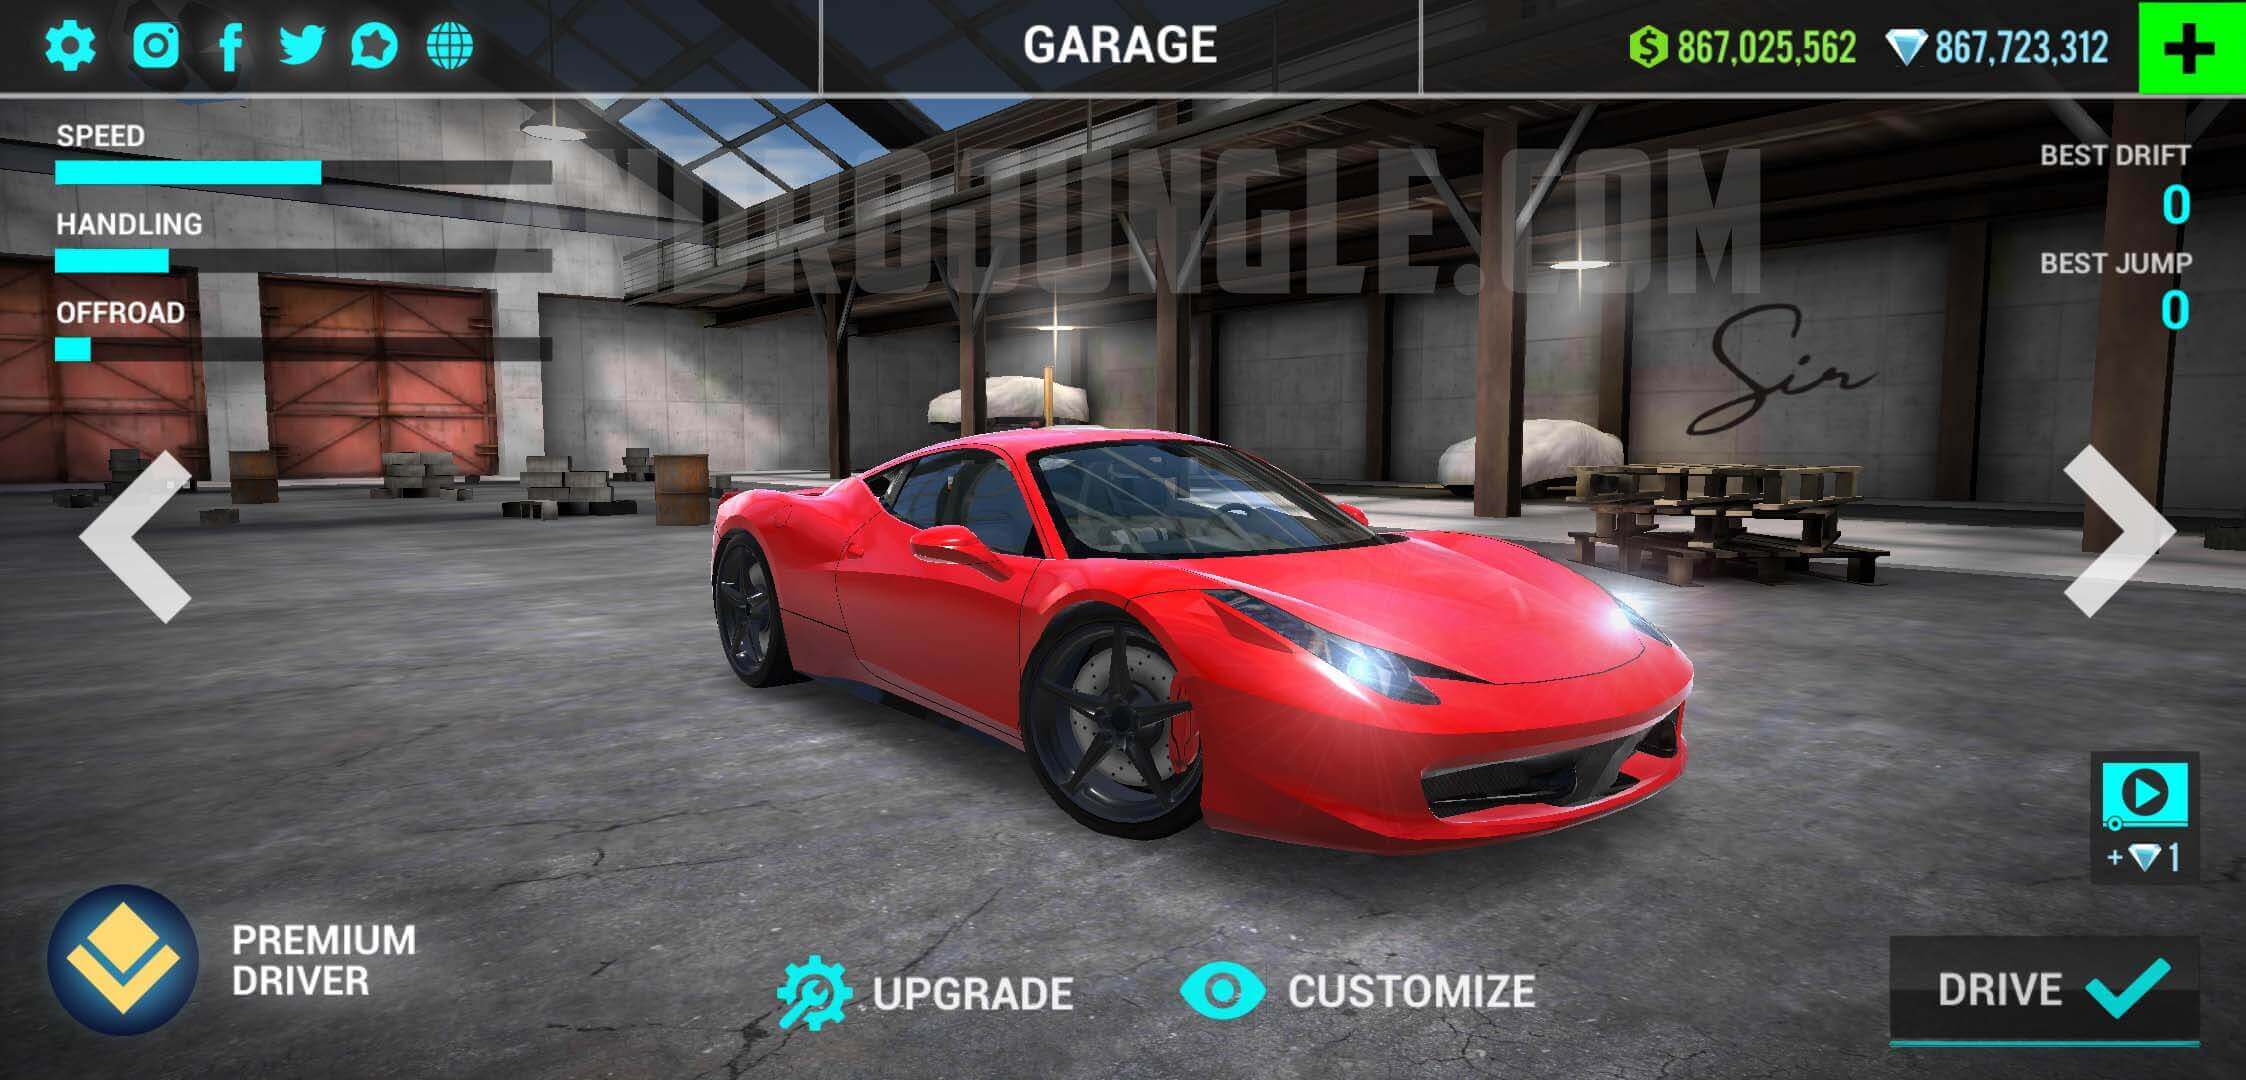 Ultimate Car Driving Simulator (MOD, Unlimited Money) 7.10.7 free on android